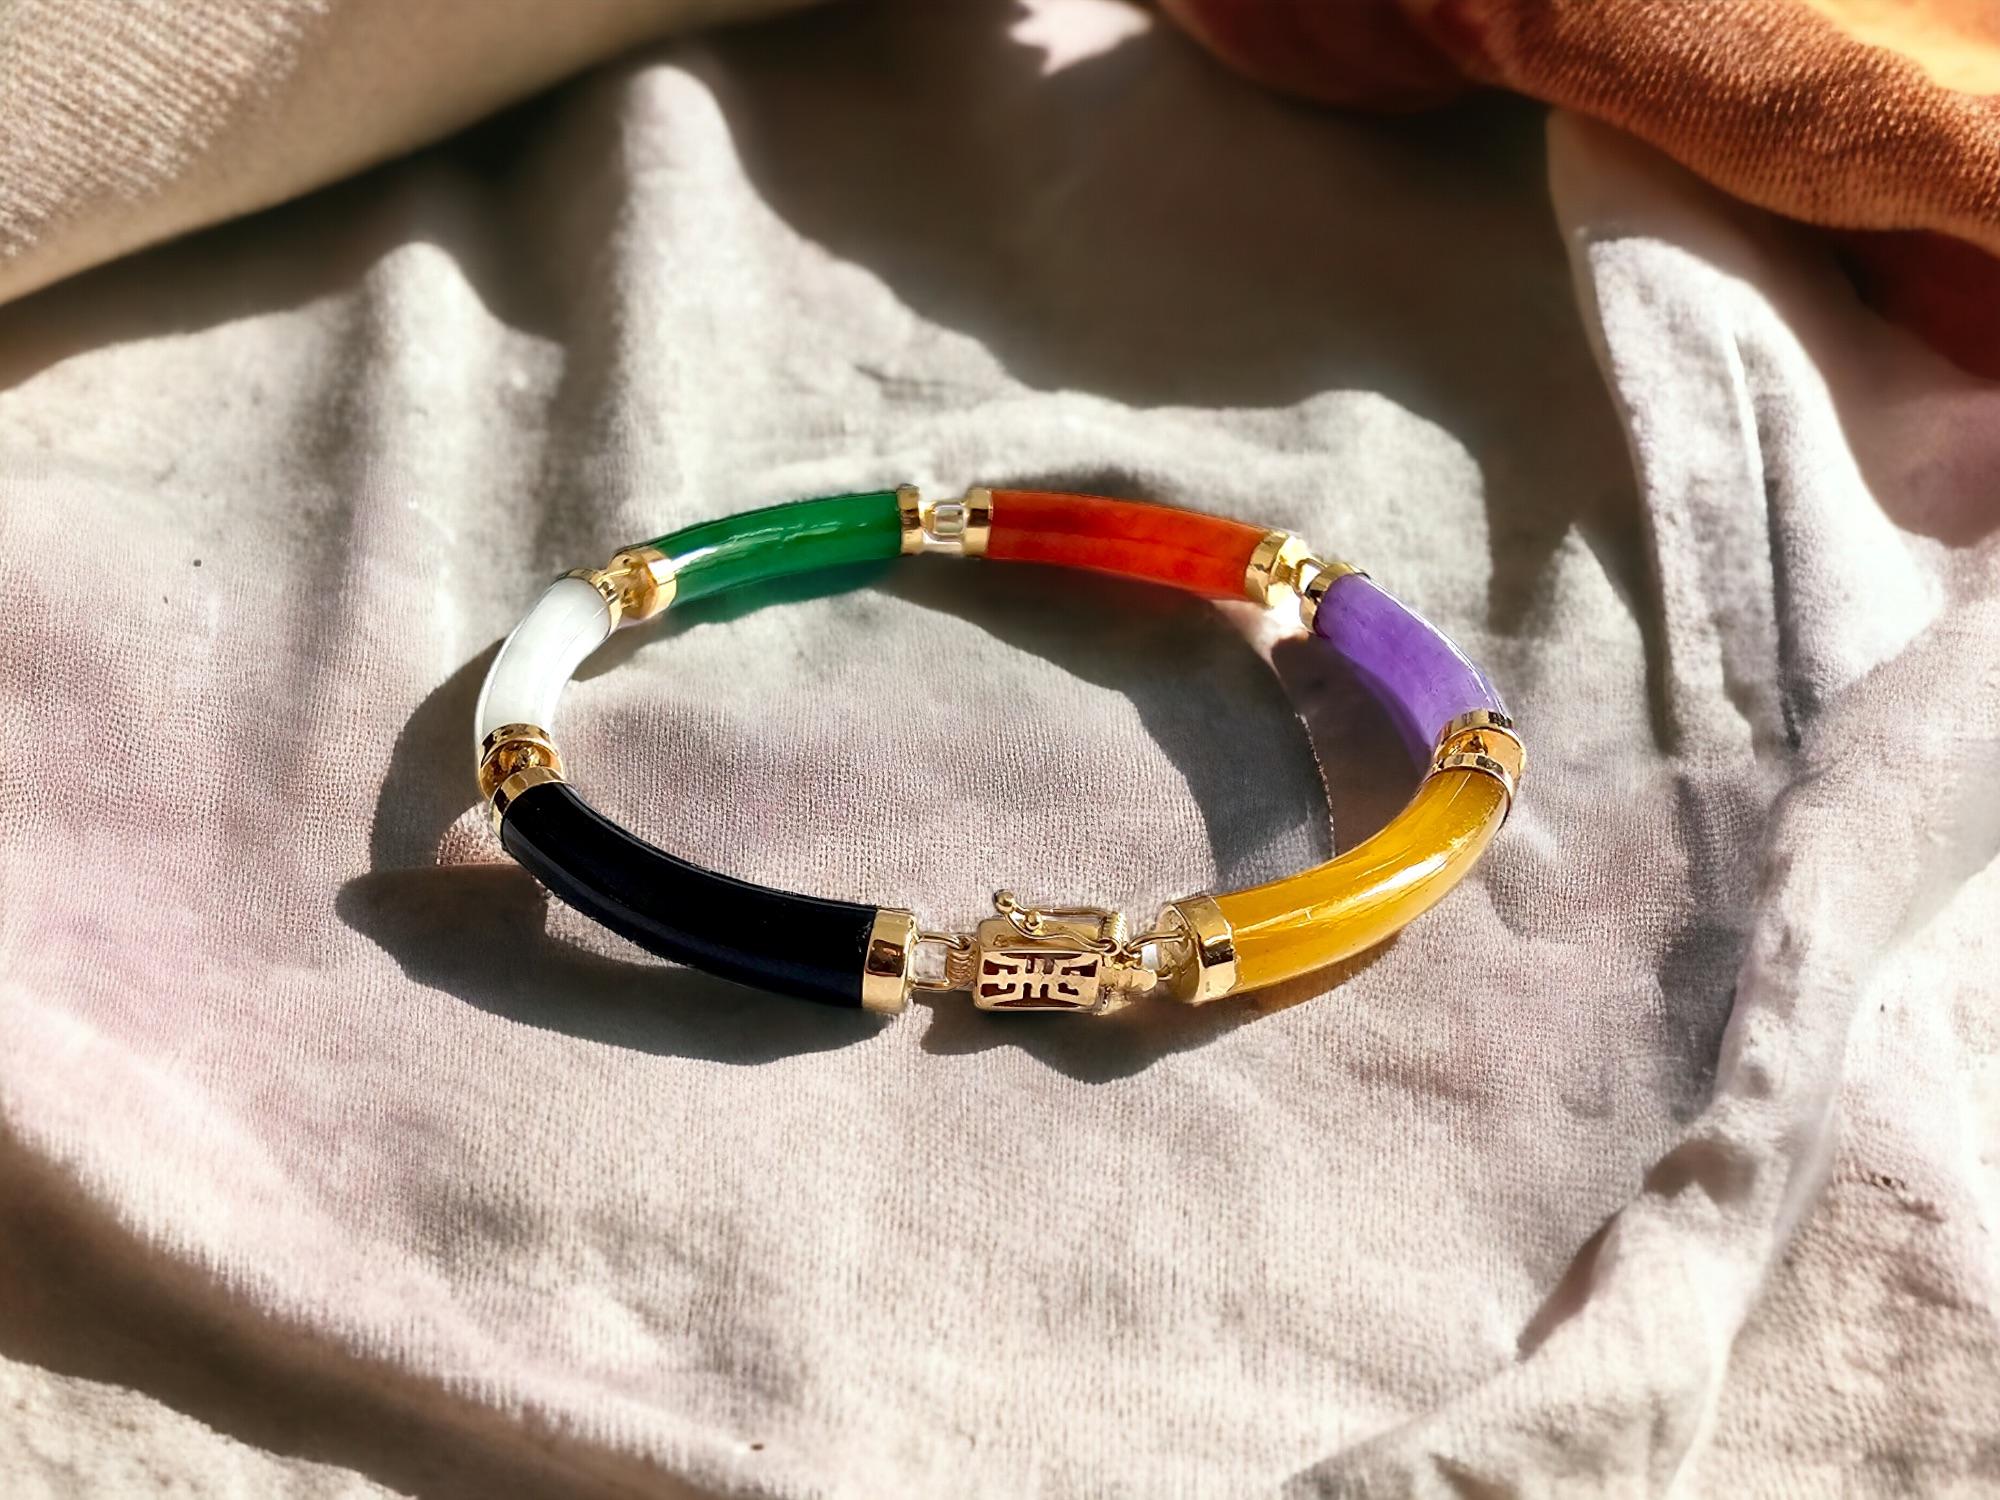 Fu Fuku Fortune Eclectic Green Jade, Red Jade, Purple Jade, Yellow Jade, Black Onyx, White MOP Tube Bracelet (with 14K Yellow Gold)

With our classical 'Fu Fuku Fortune' design, we made a eclectic bracelet perfect to add a splash of abstract colors